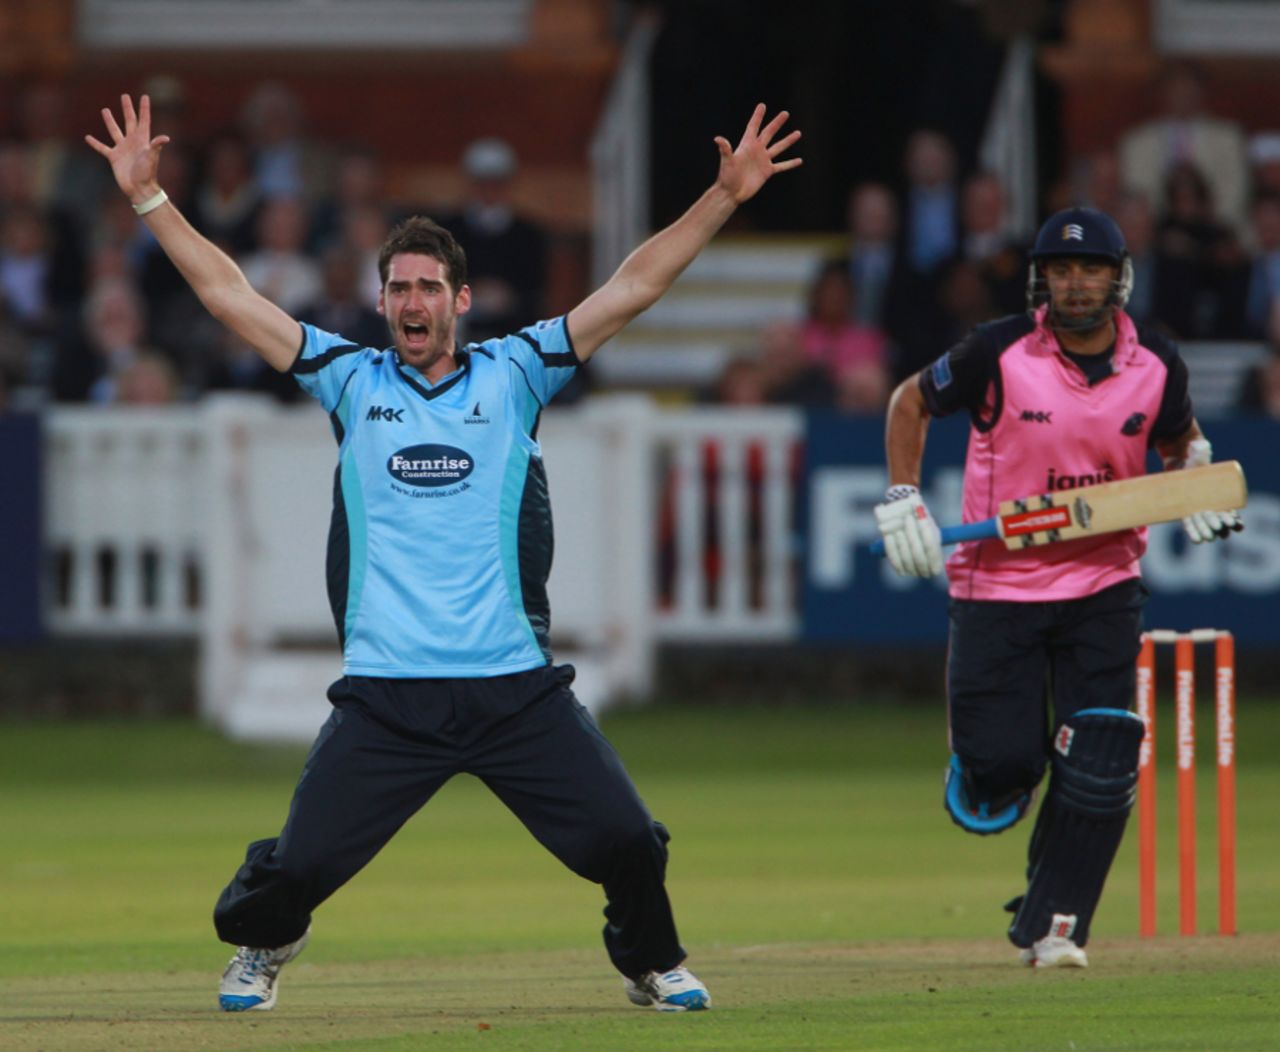 Chris Liddle took four wickets to hasten Middlesex's defeat, Middlesex v Sussex, Friends Life t20, Lord's, June 16 2011